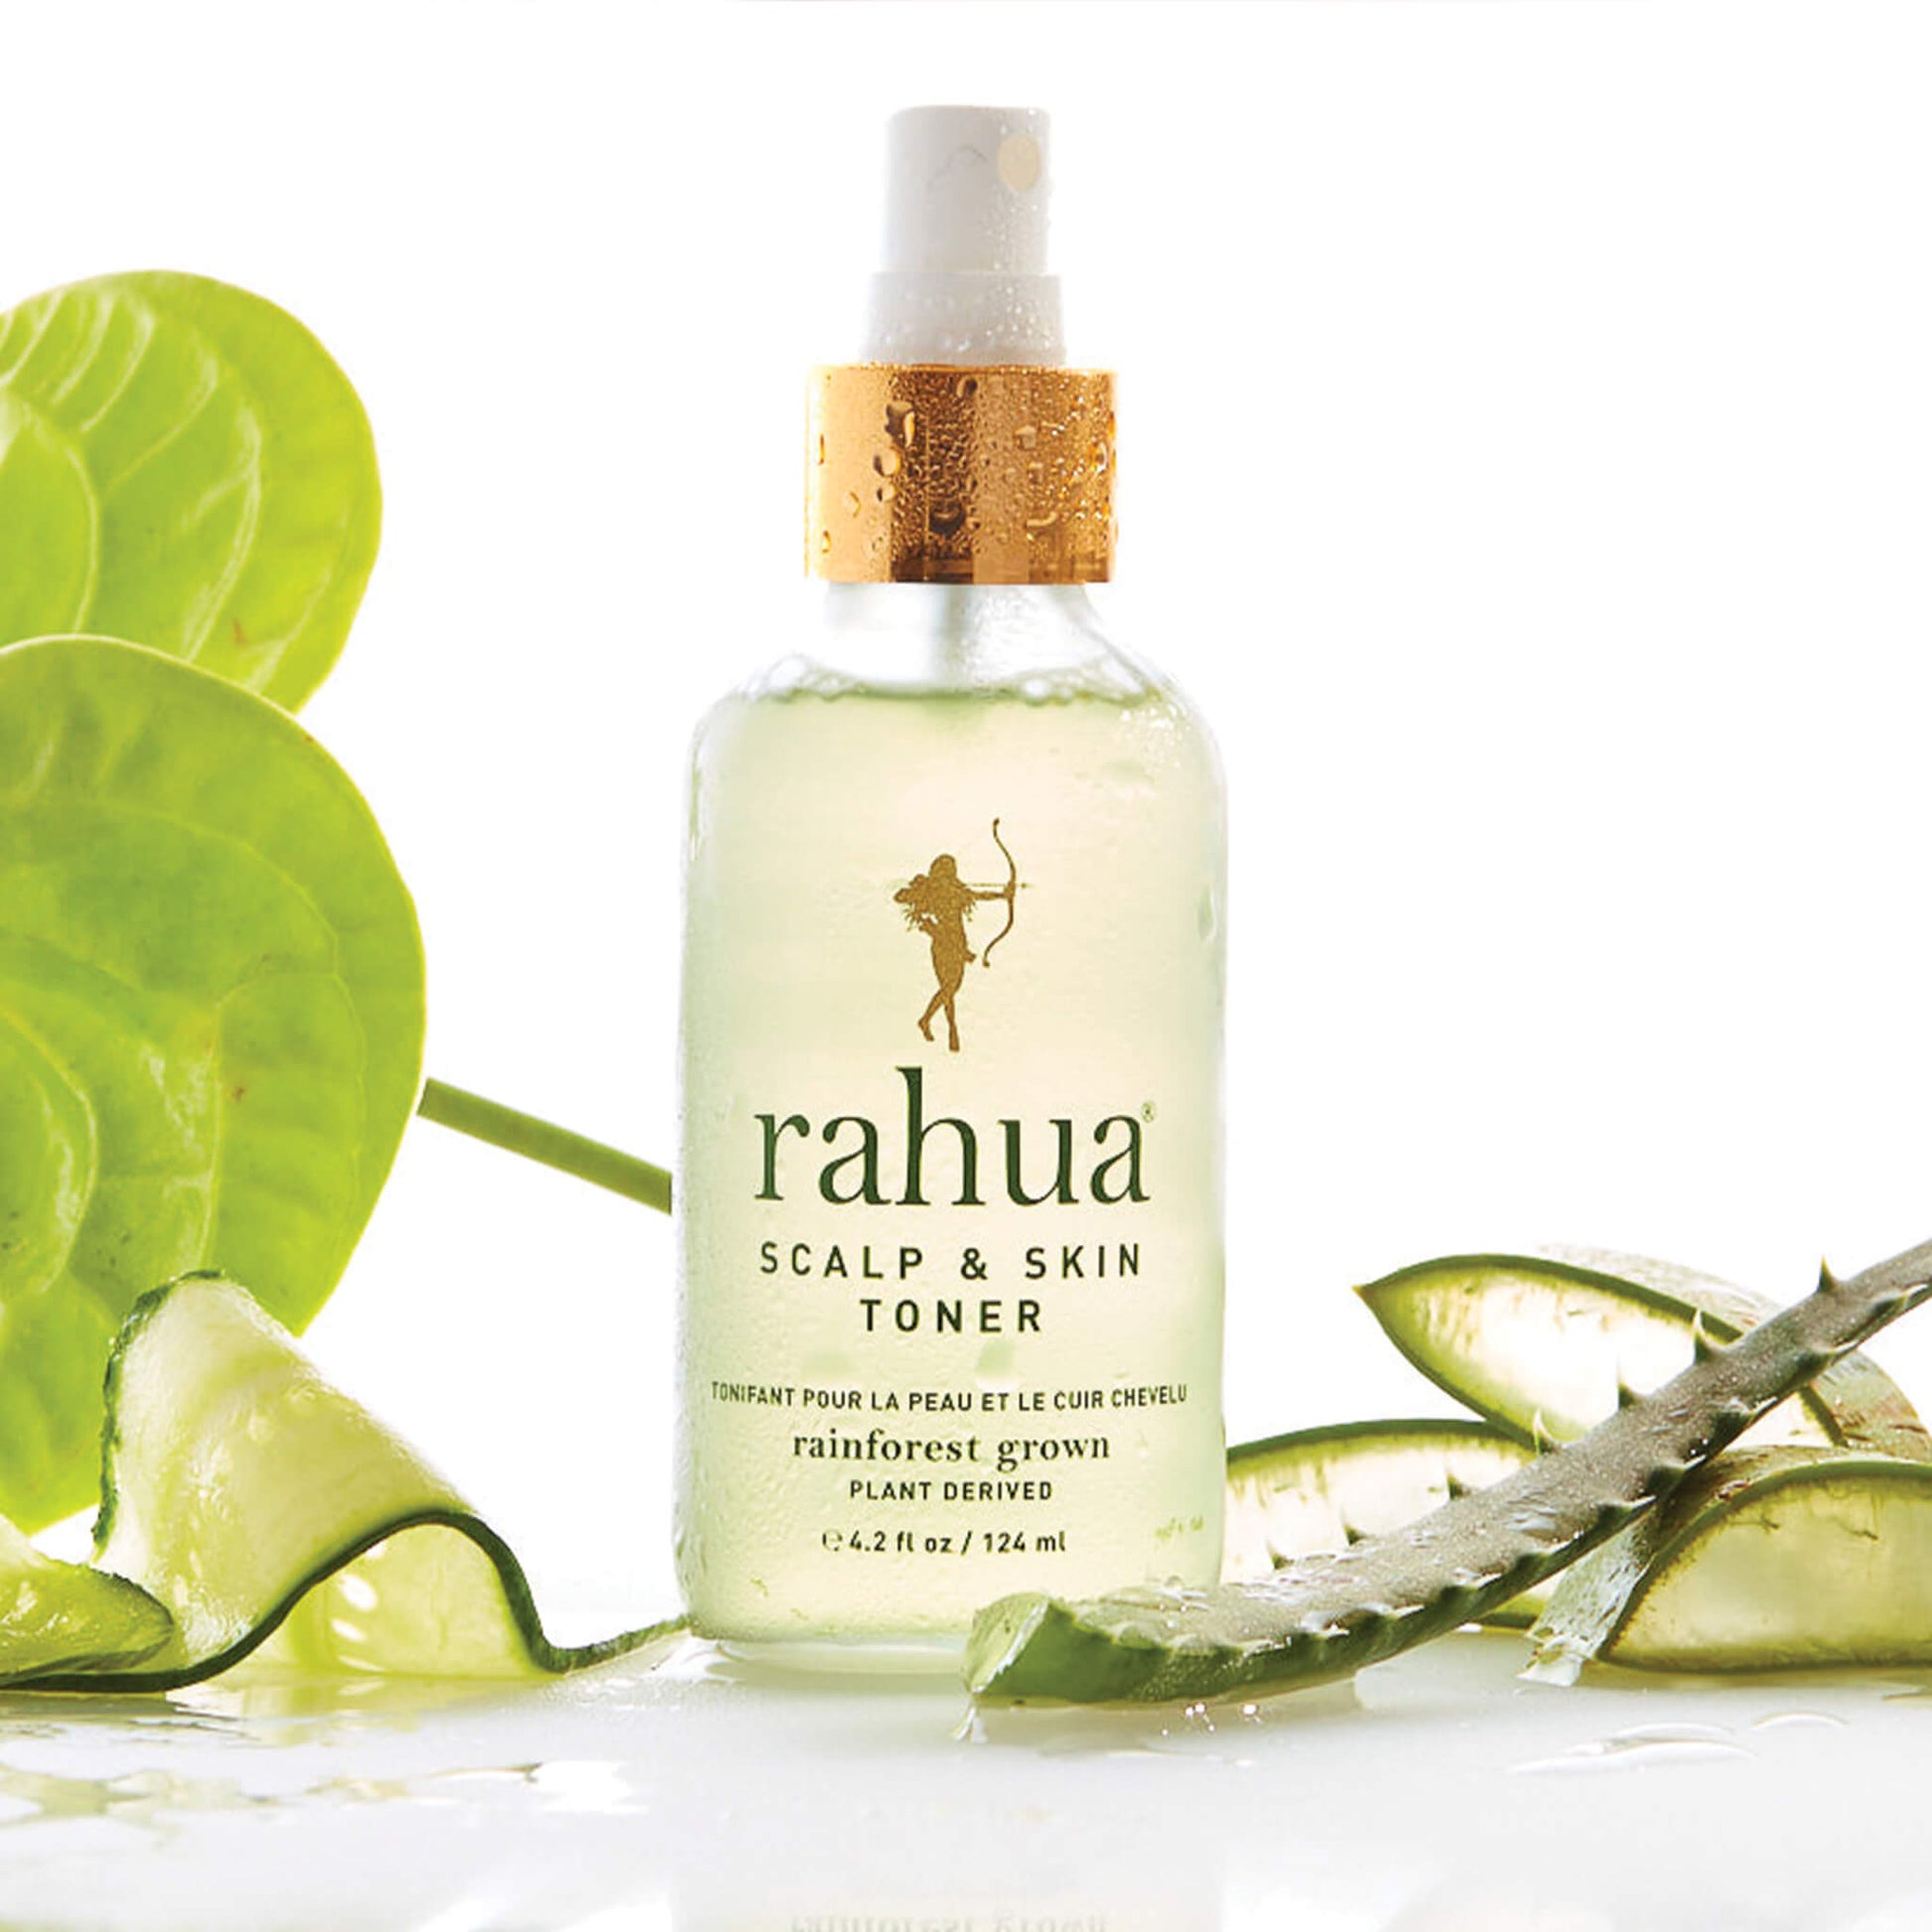 Rahua Scalp and Skin Toner with aloe vera leaf, thin slice of Cucumber and other leaf